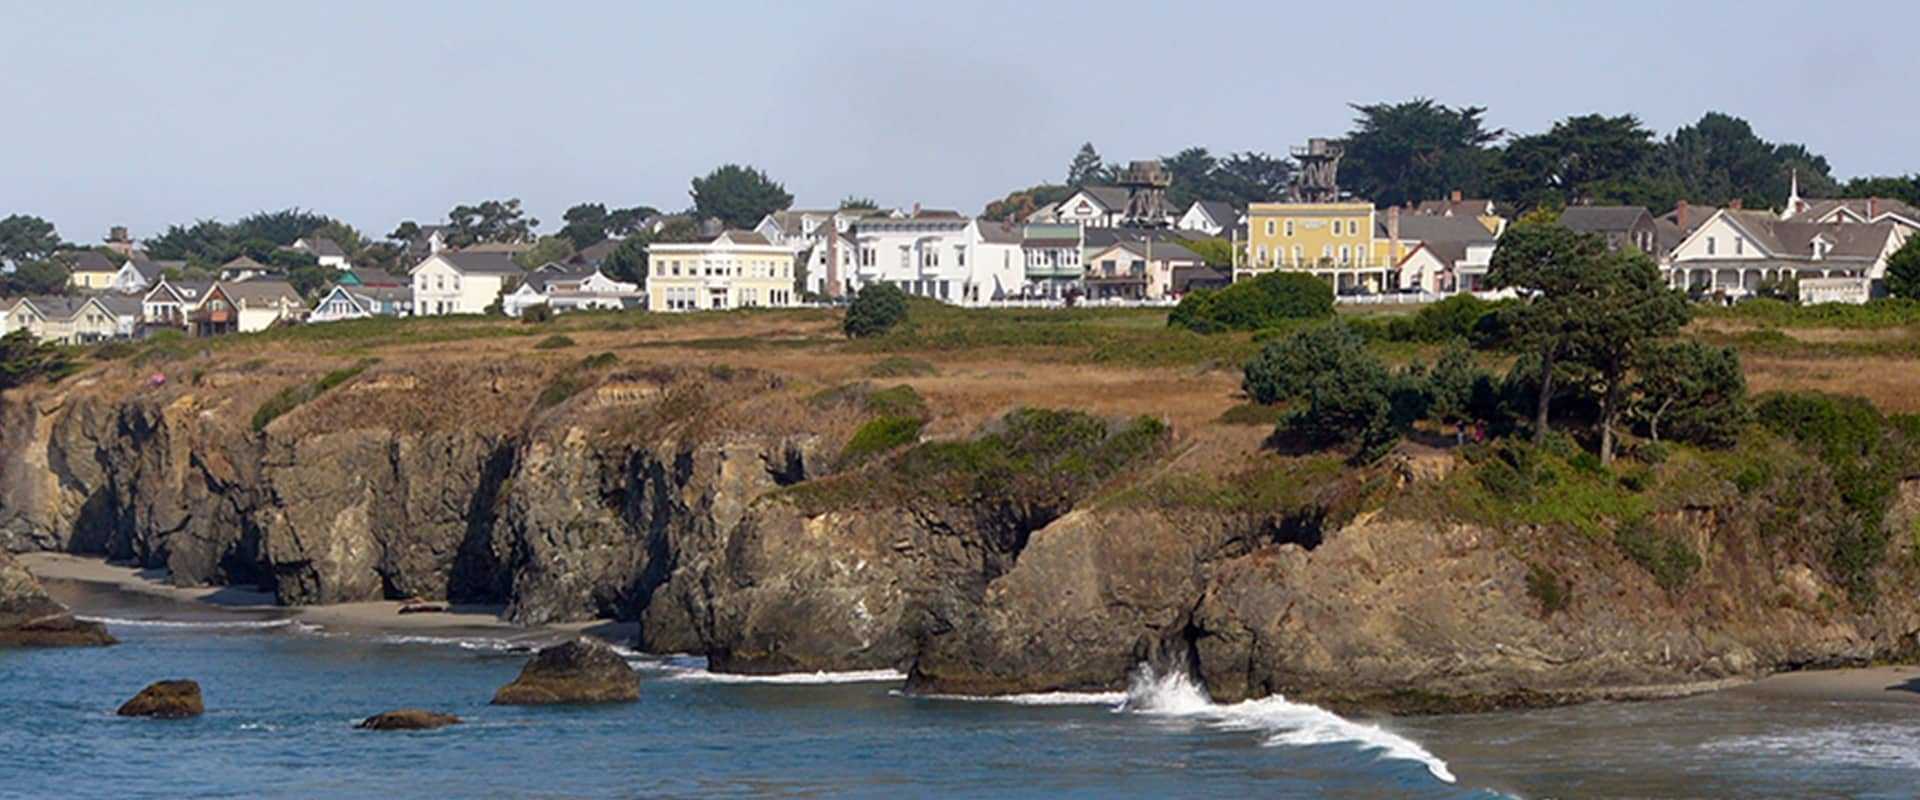 residential homes on the side of cliffs